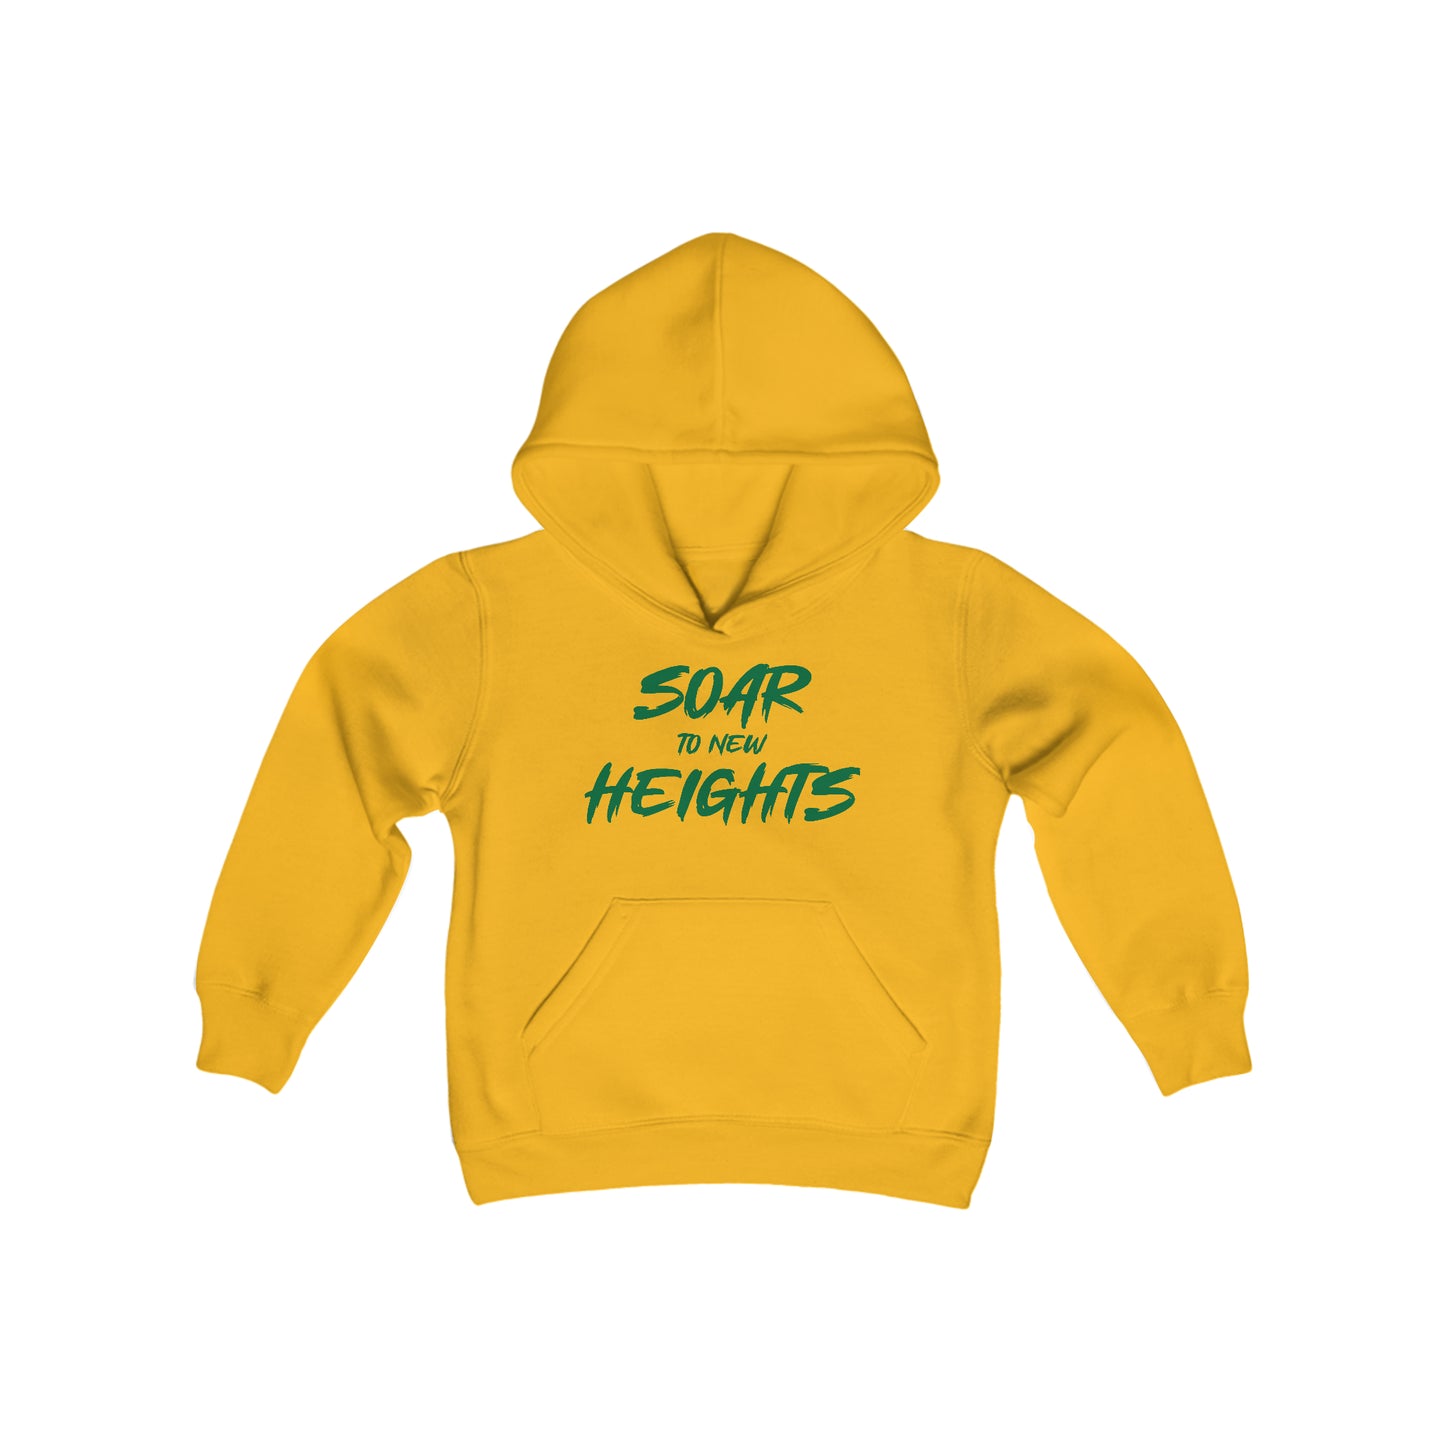 Soar To New Heights Hoodie - Youth